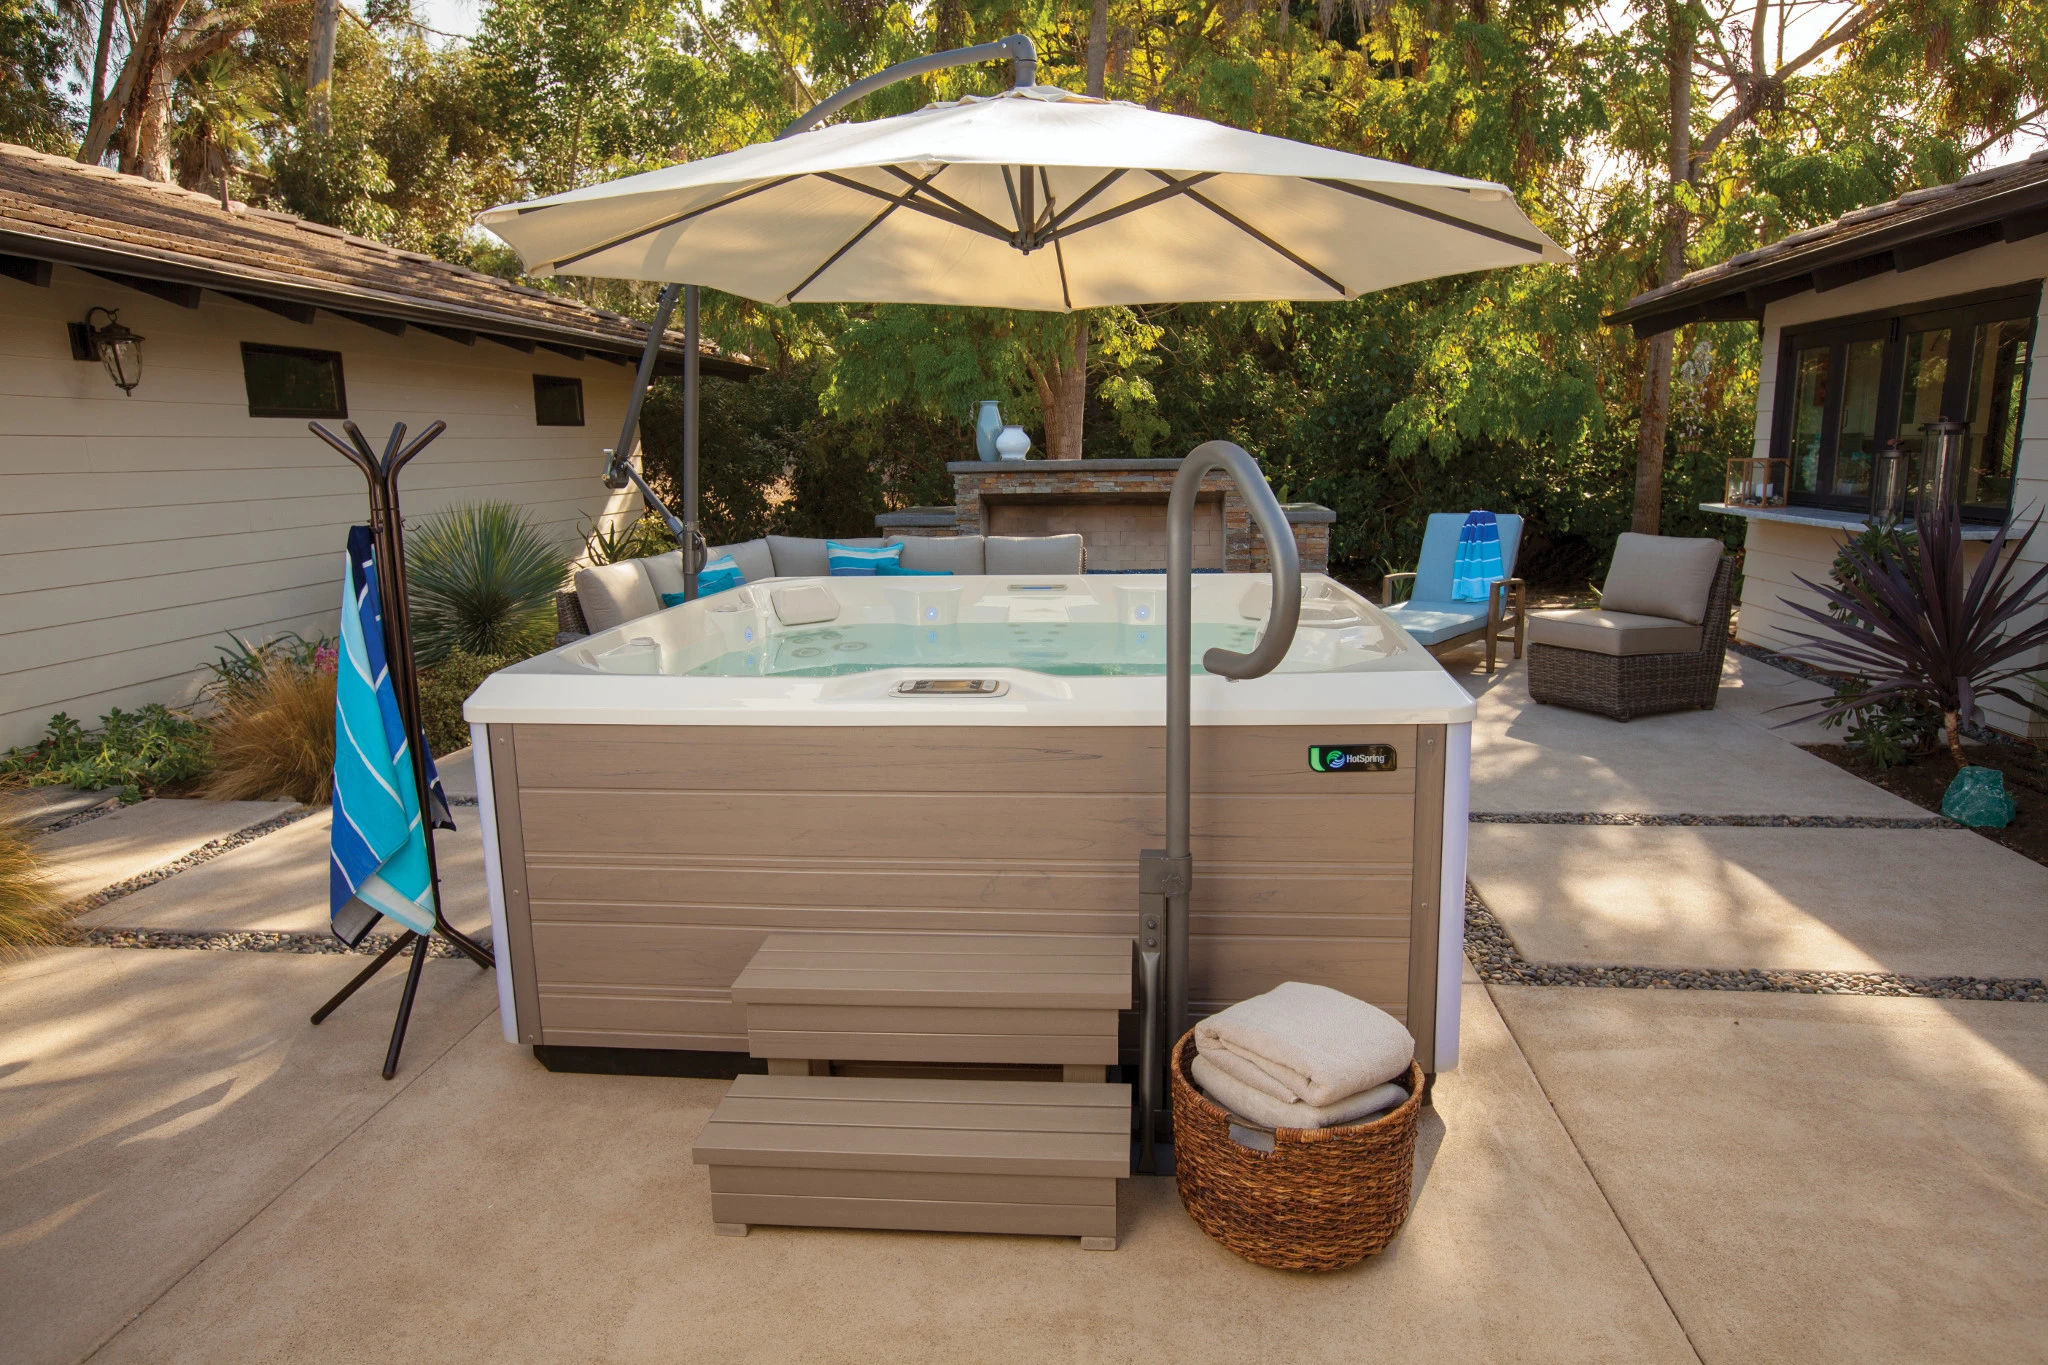 The Best Hot Tub Accessories for Your Spa | Fiesta